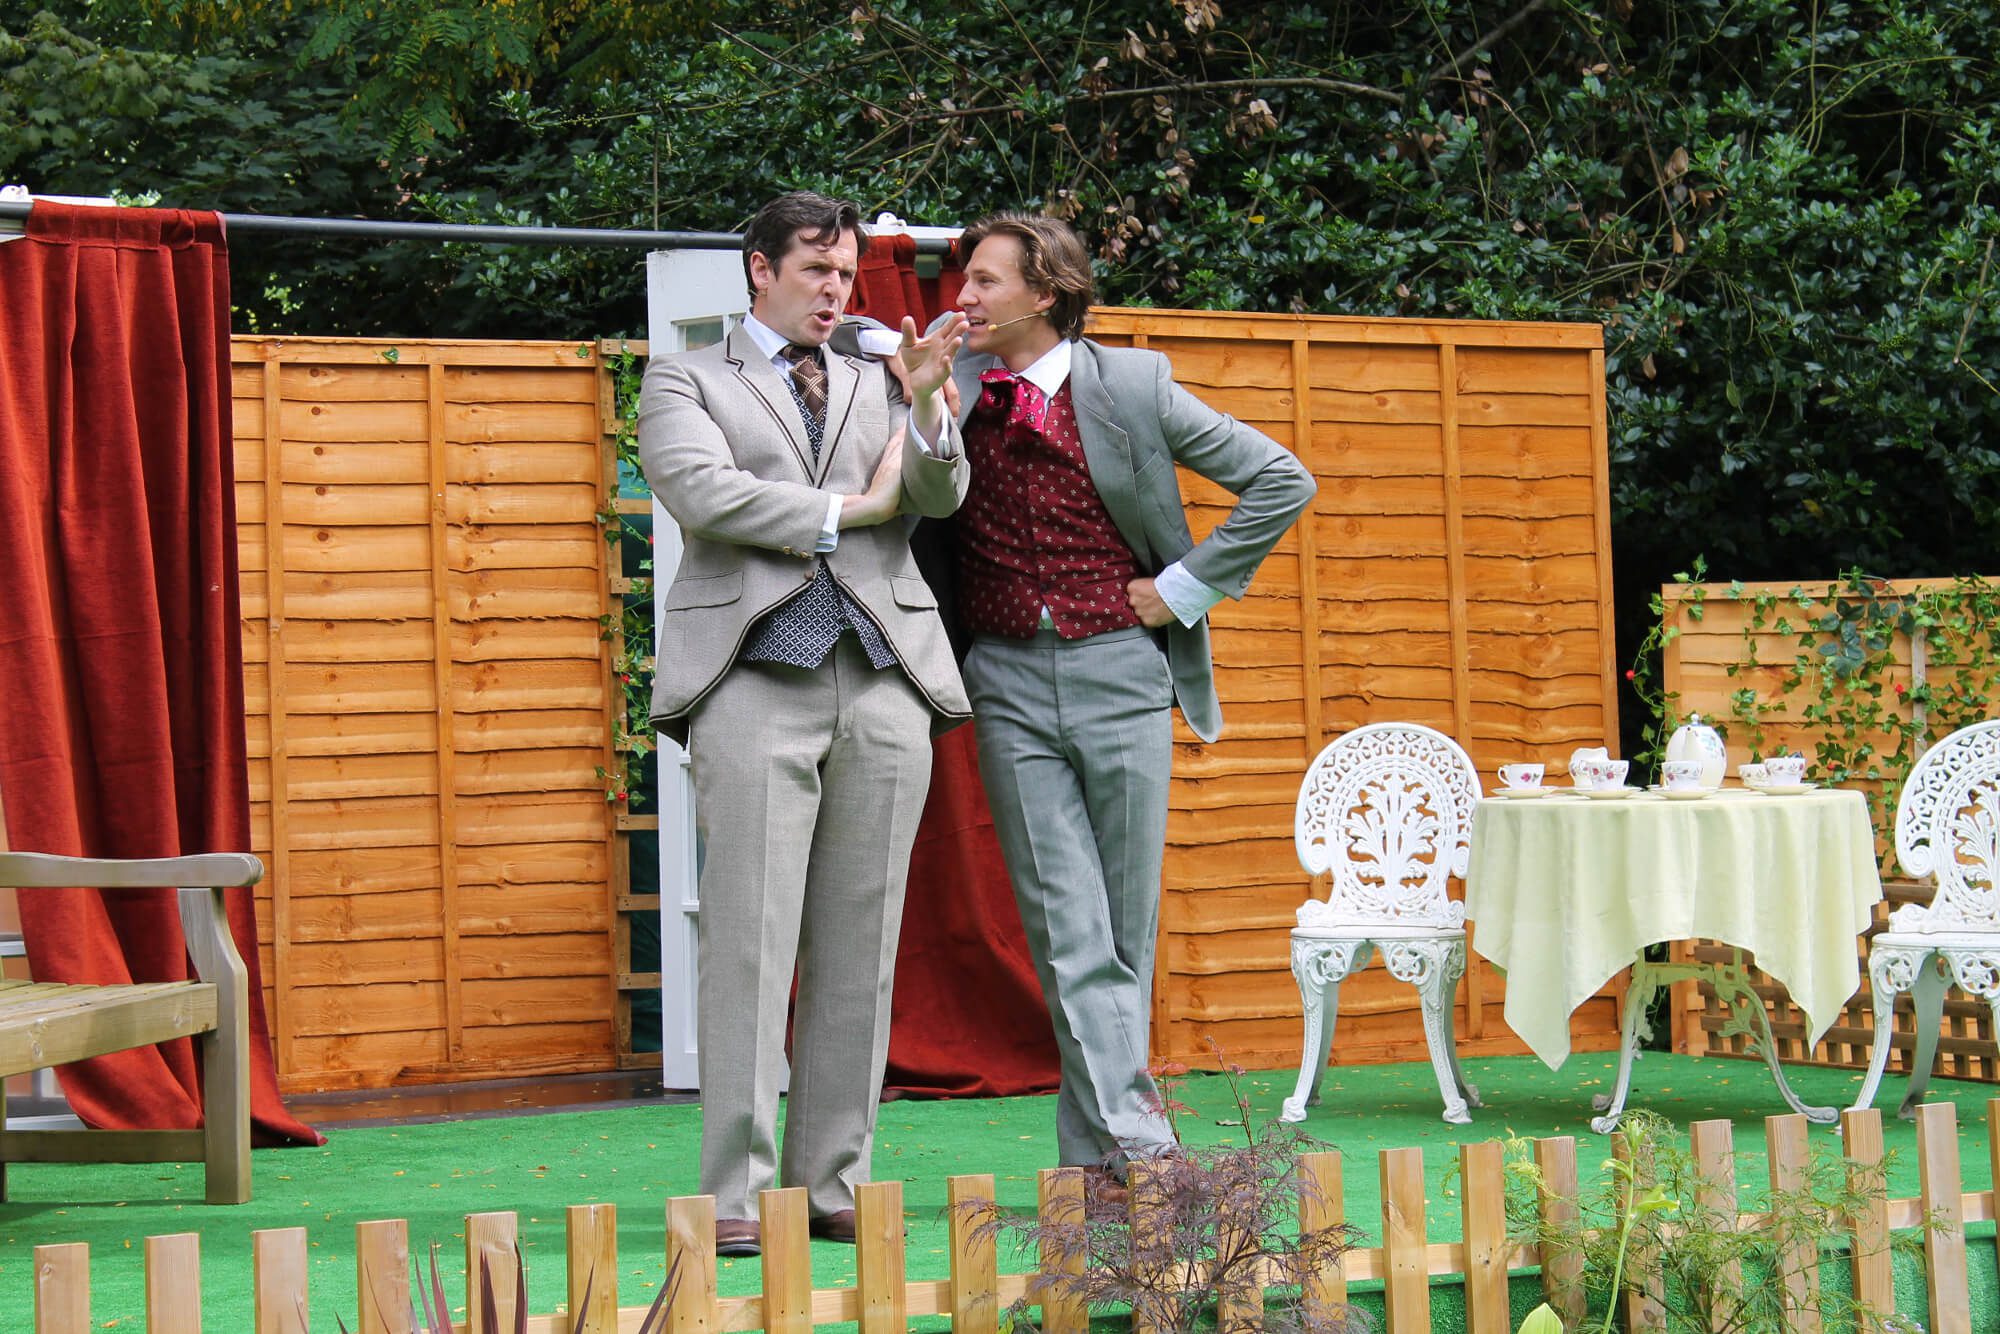 The Importance of Being Earnest Outdoor Theatre: Review